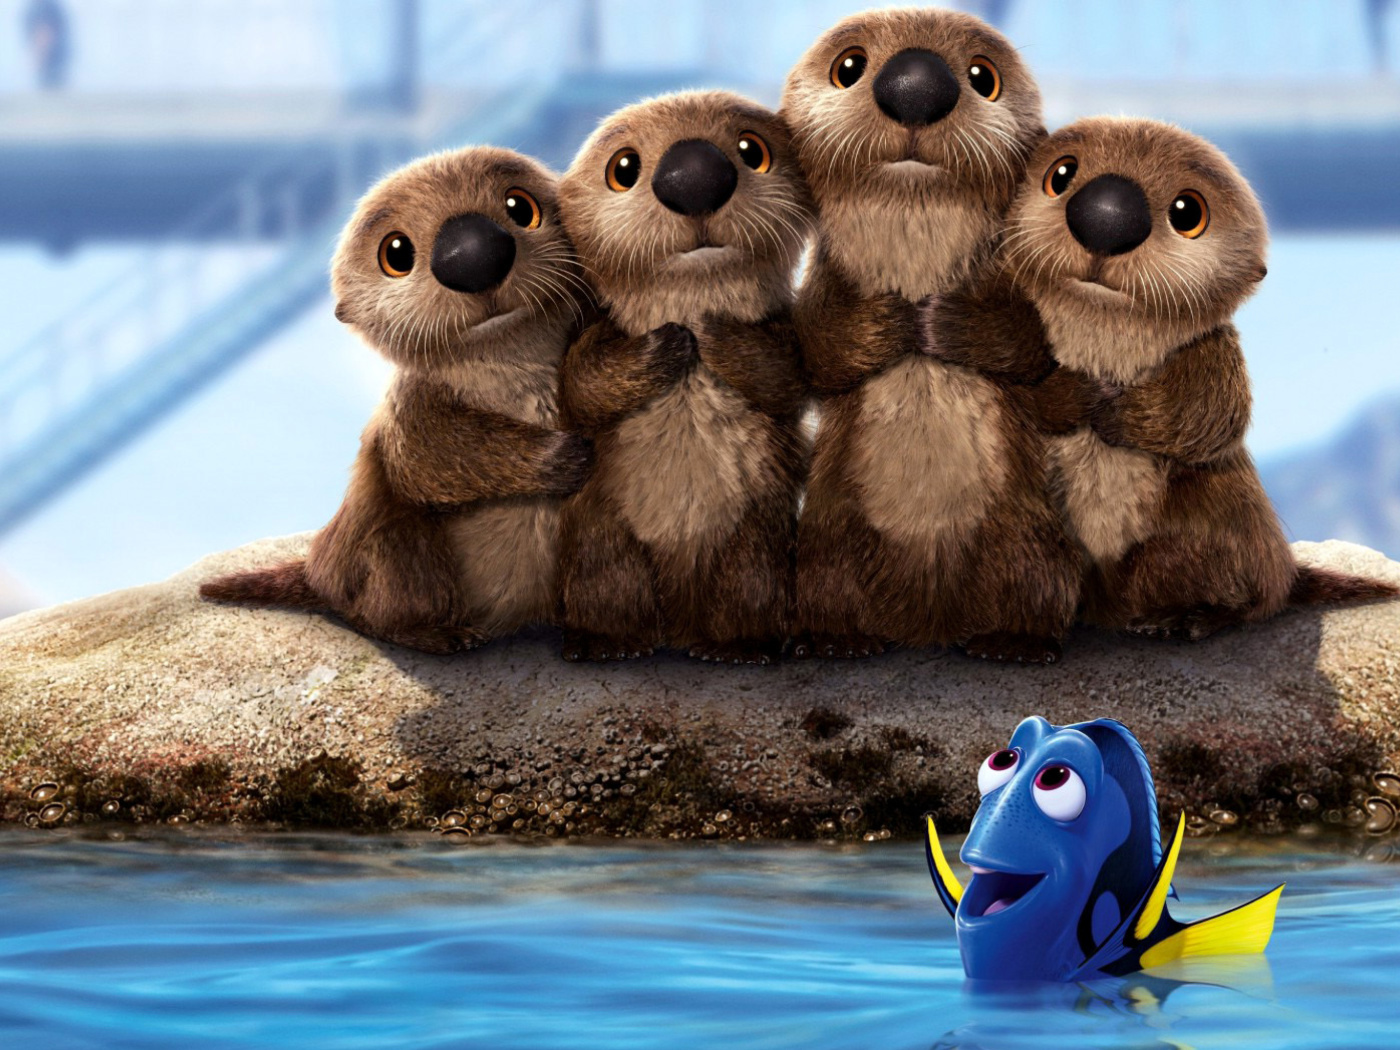 Finding Dory 3D Film with Beavers screenshot #1 1400x1050